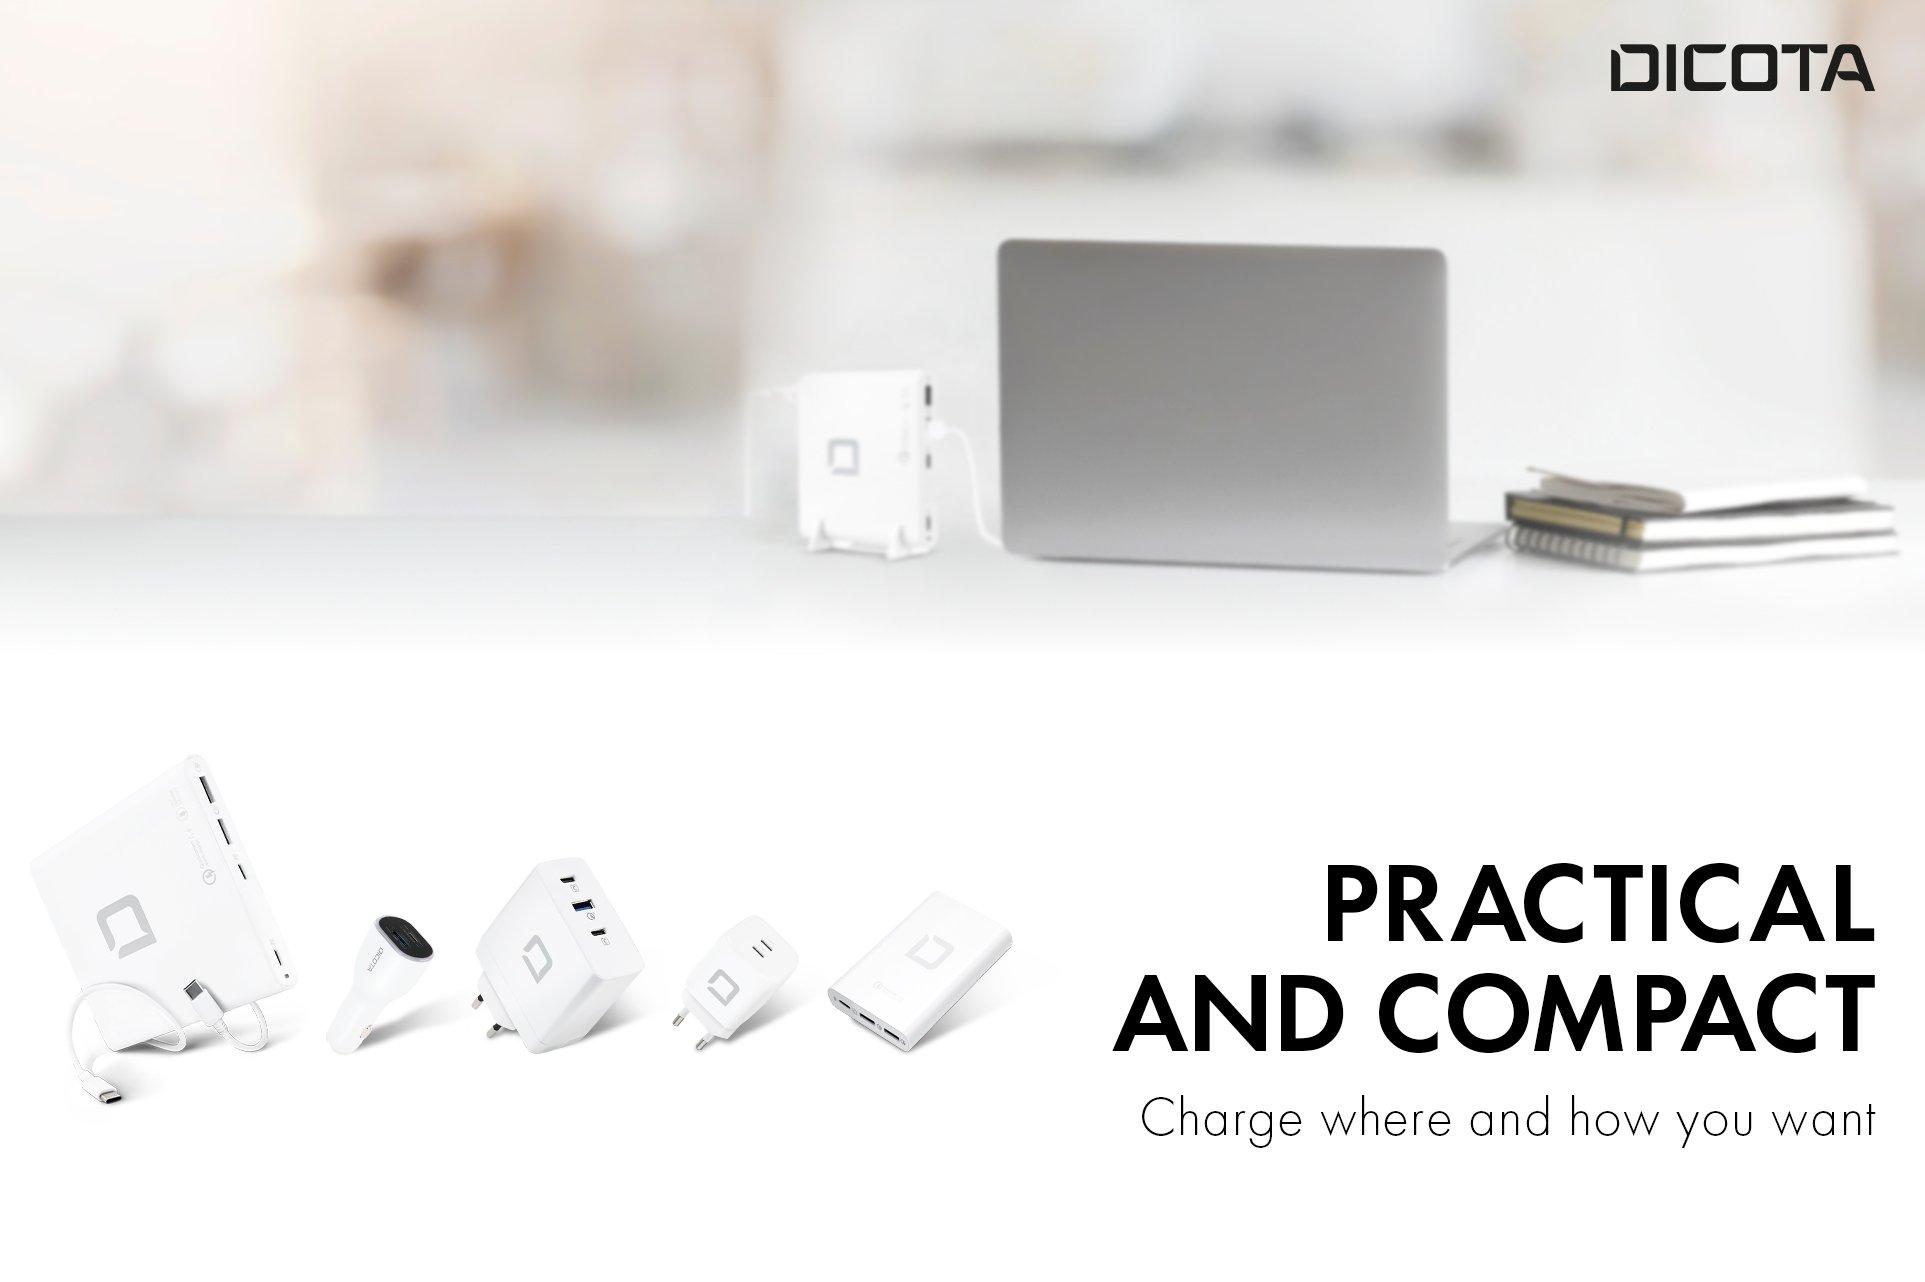 The importance of chargers in a connected world